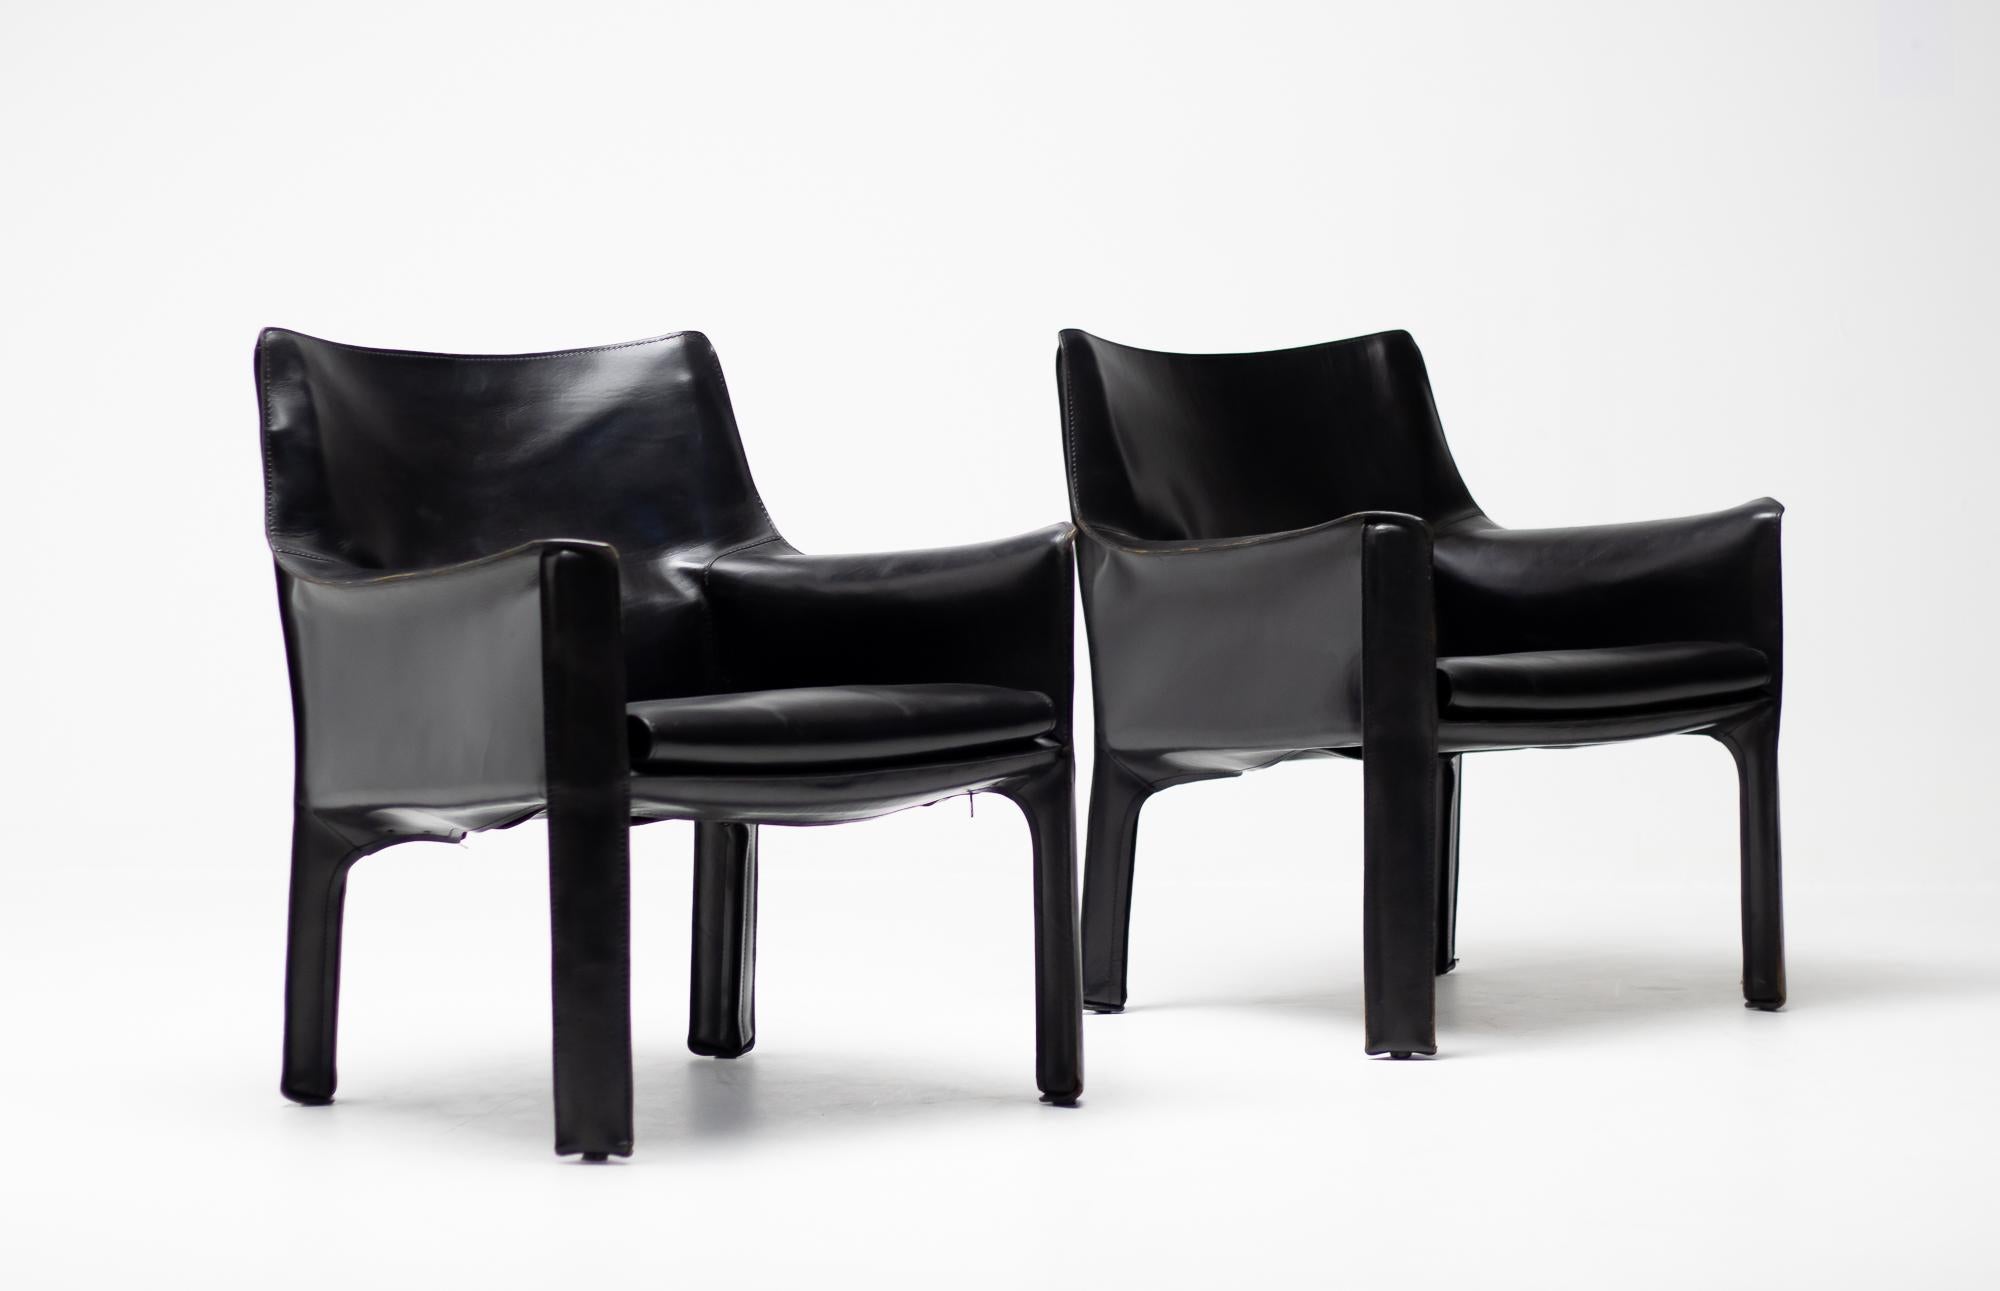 Steel Pair of Cassina Cab 414 Lounge Chairs by Mario Bellini